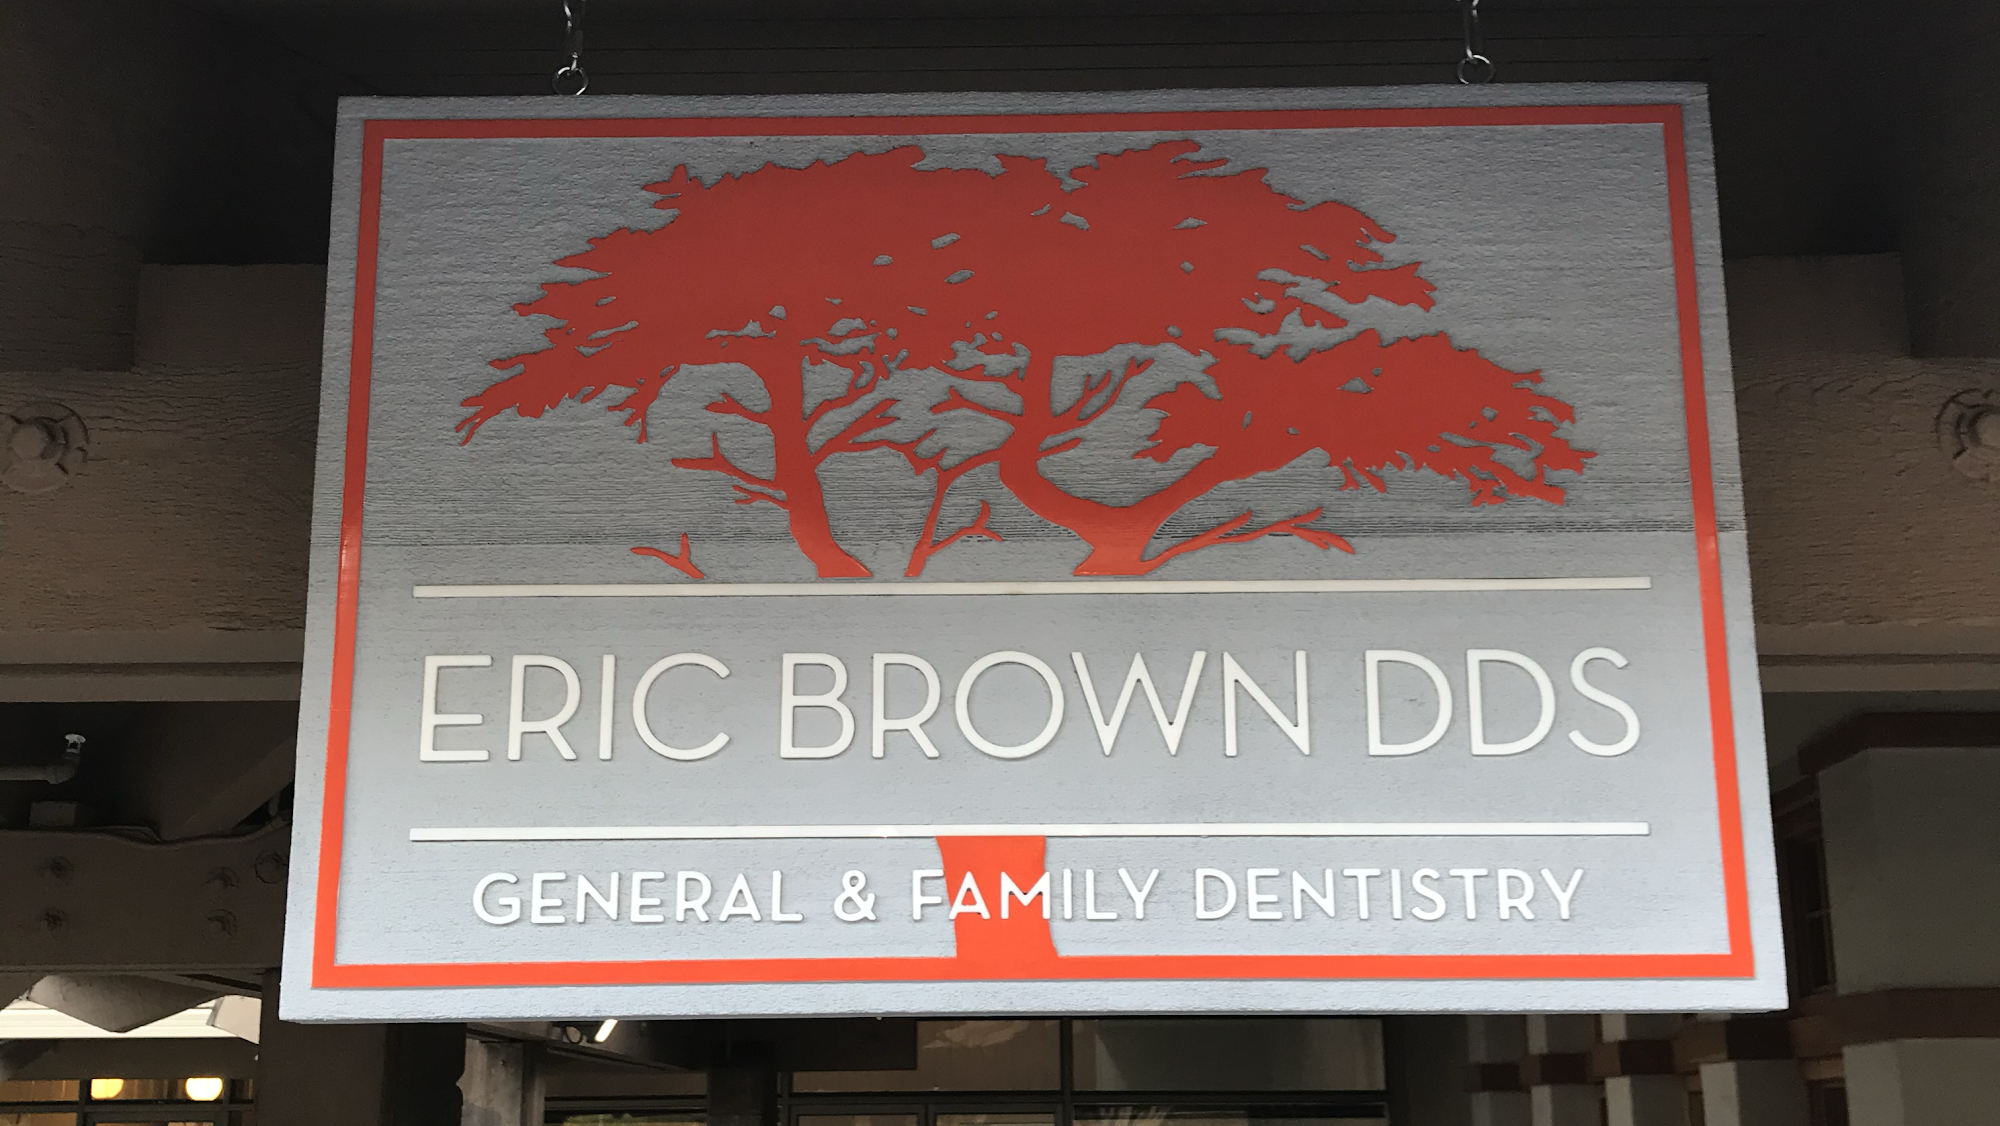 Eric Brown DDS